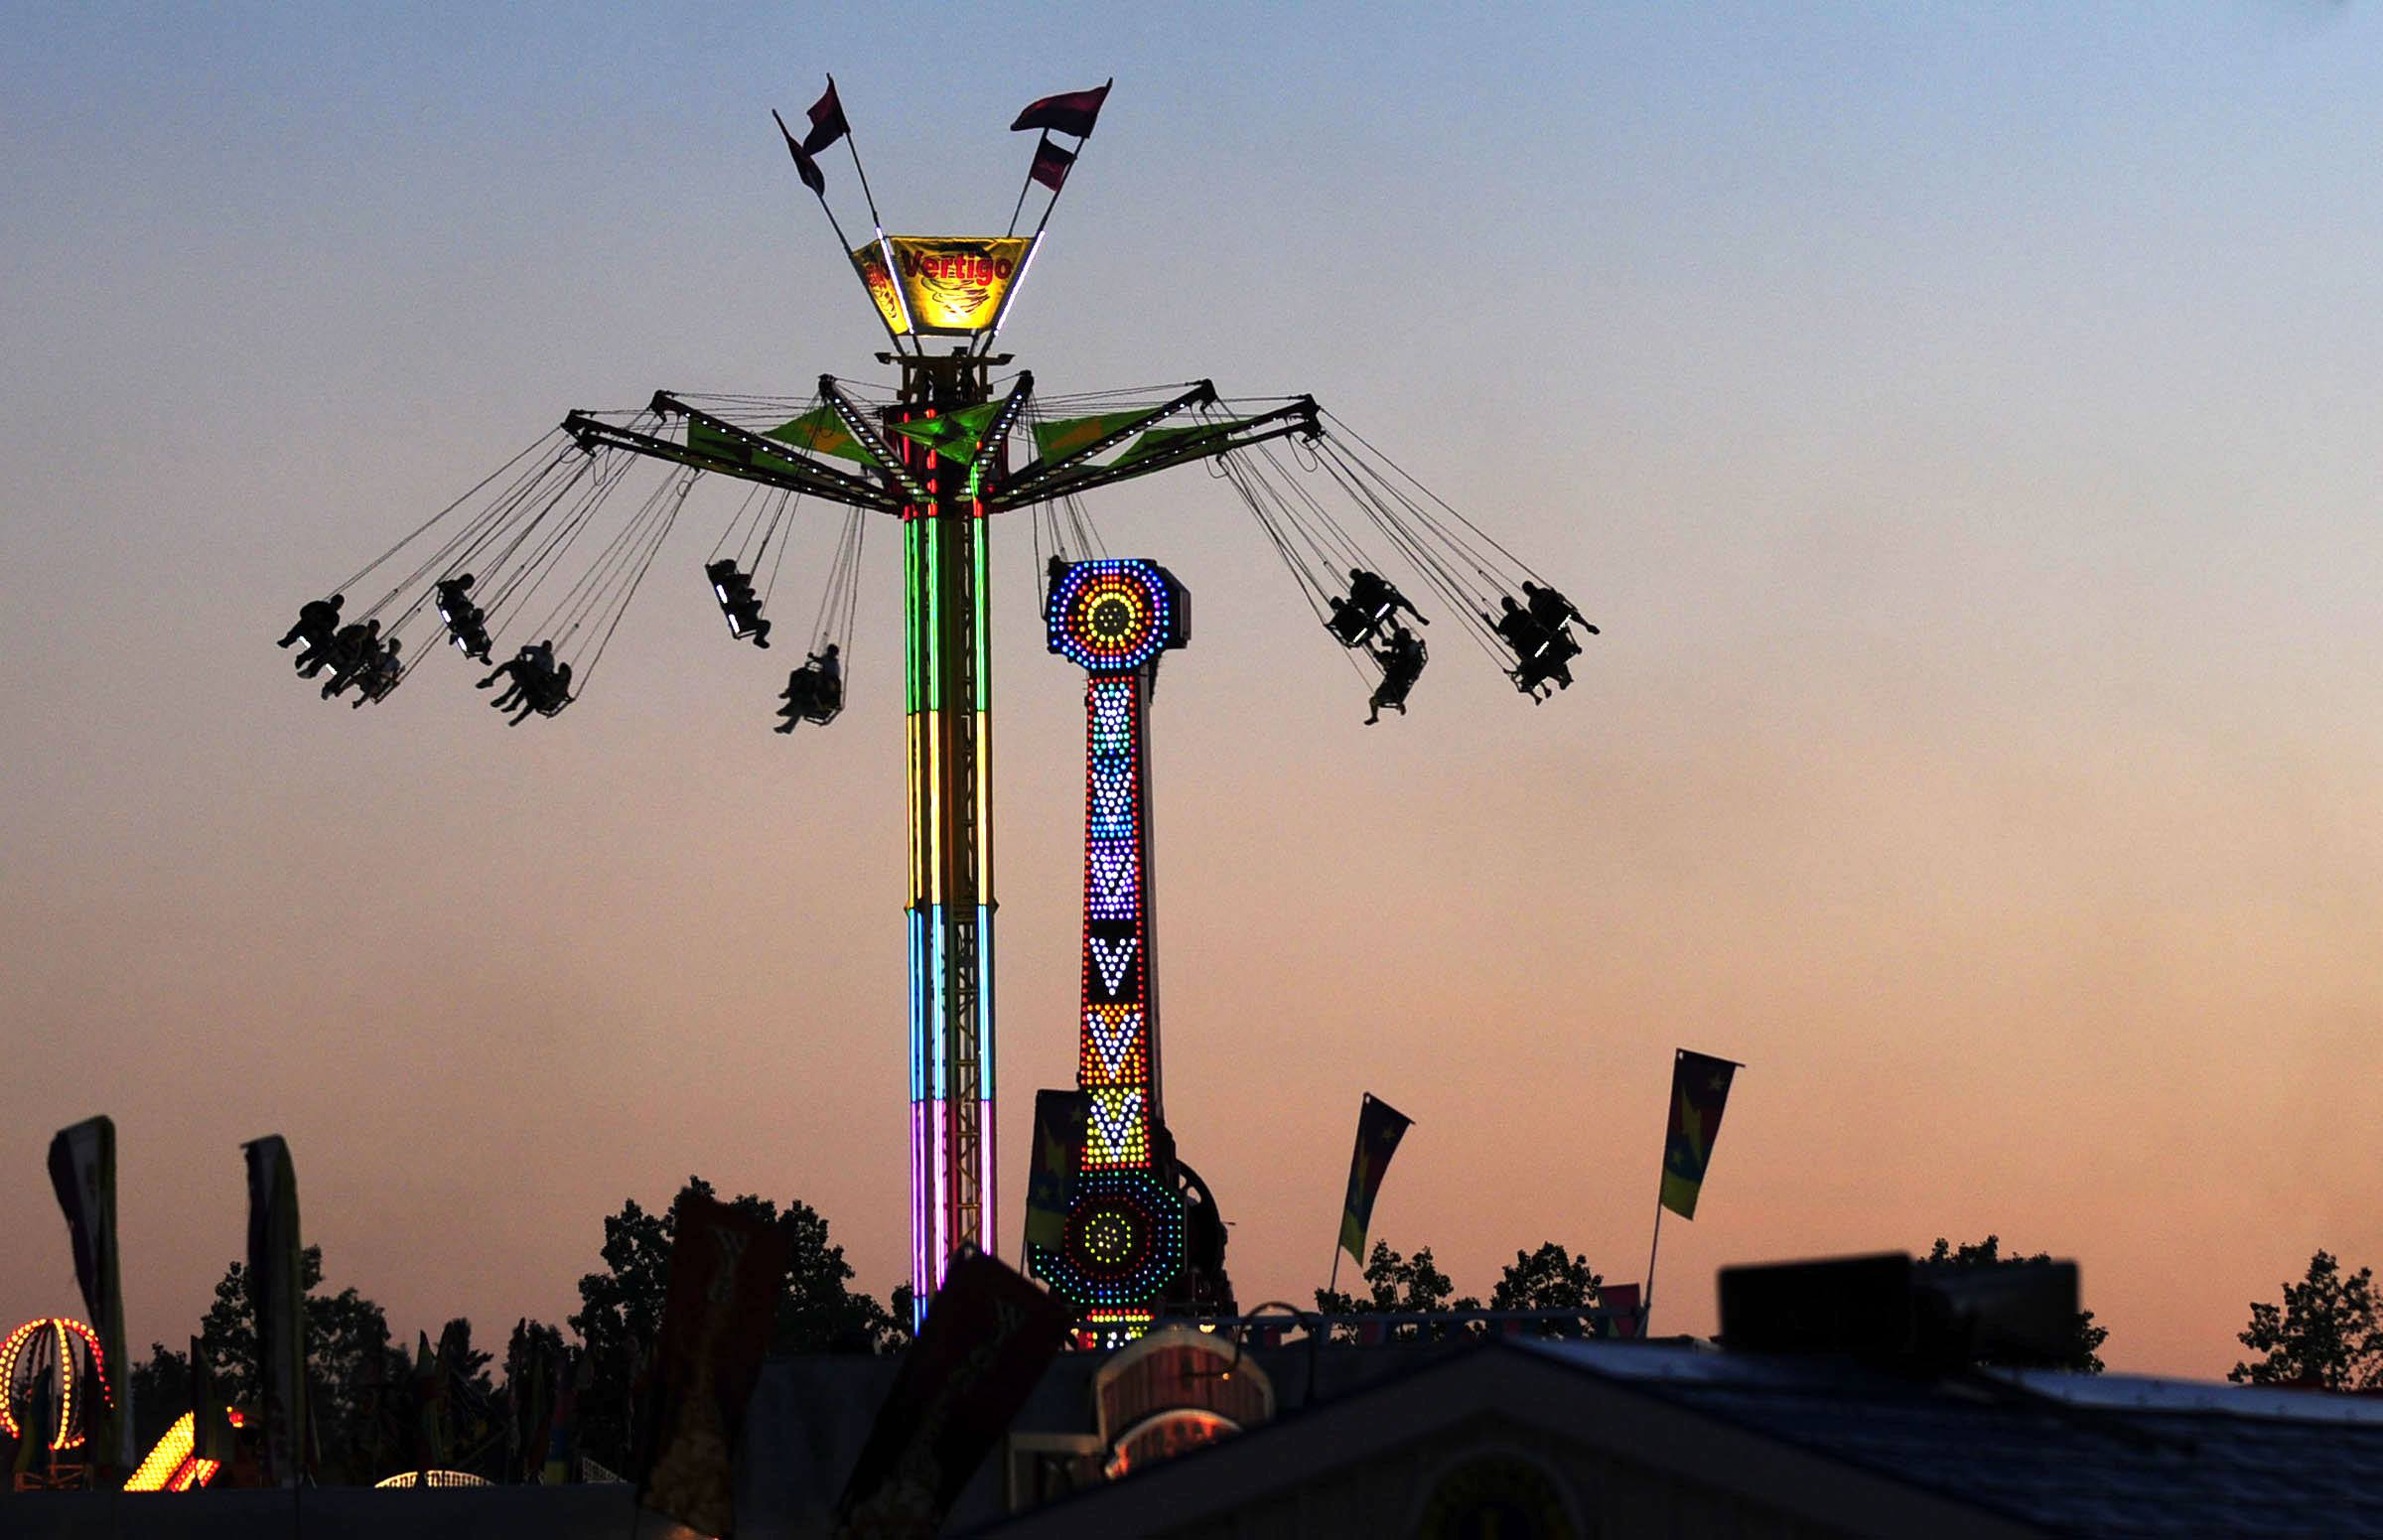 The Vertigo ride at the Westerner was a popular choice among thrill seekers during the fair.